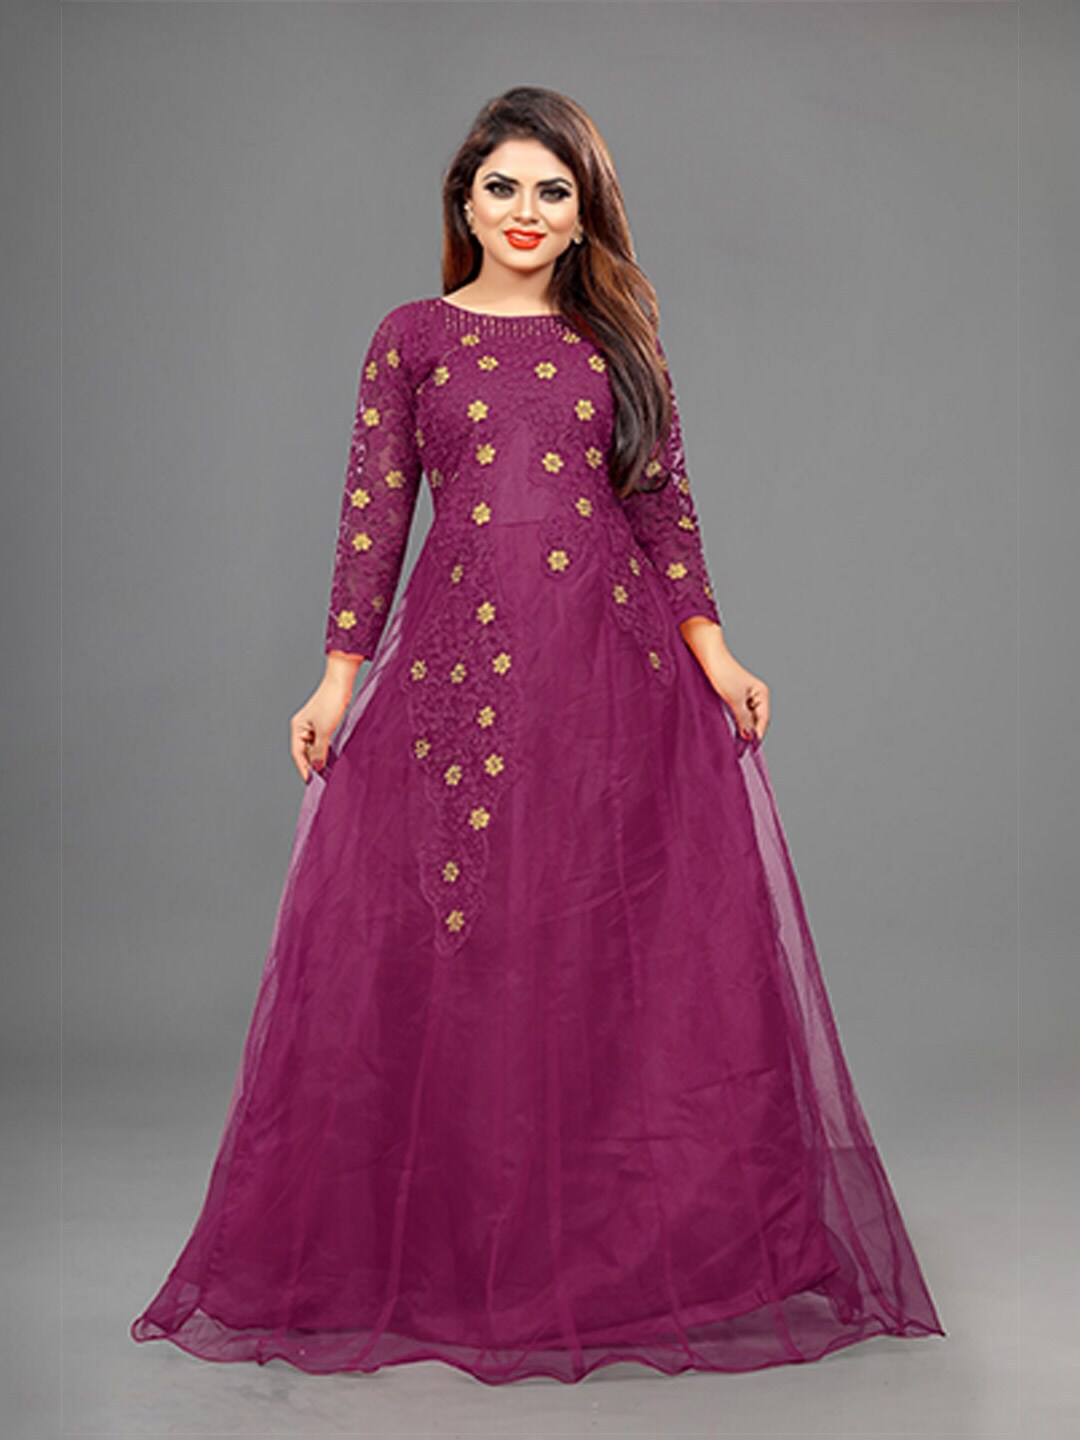 APNISHA Purple Floral Embroidered Net Ethnic Maxi Dress Price in India